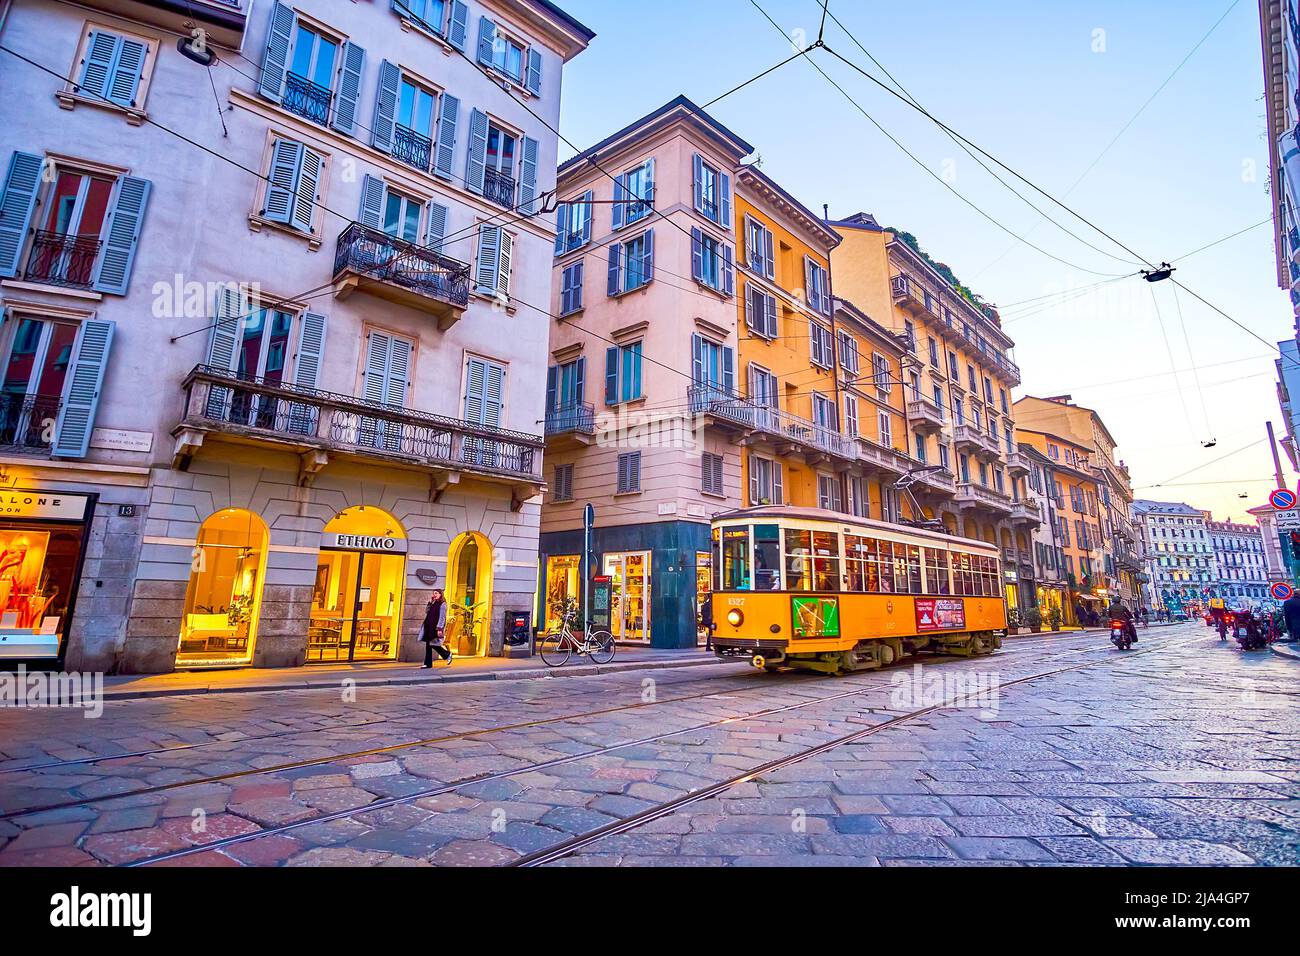 MILAN, ITALY - APRIL 5, 2022: Vintage tram rides along historical Corso Magenta street with old buildings in evening time, on April 5 in Milan, Italy Stock Photo